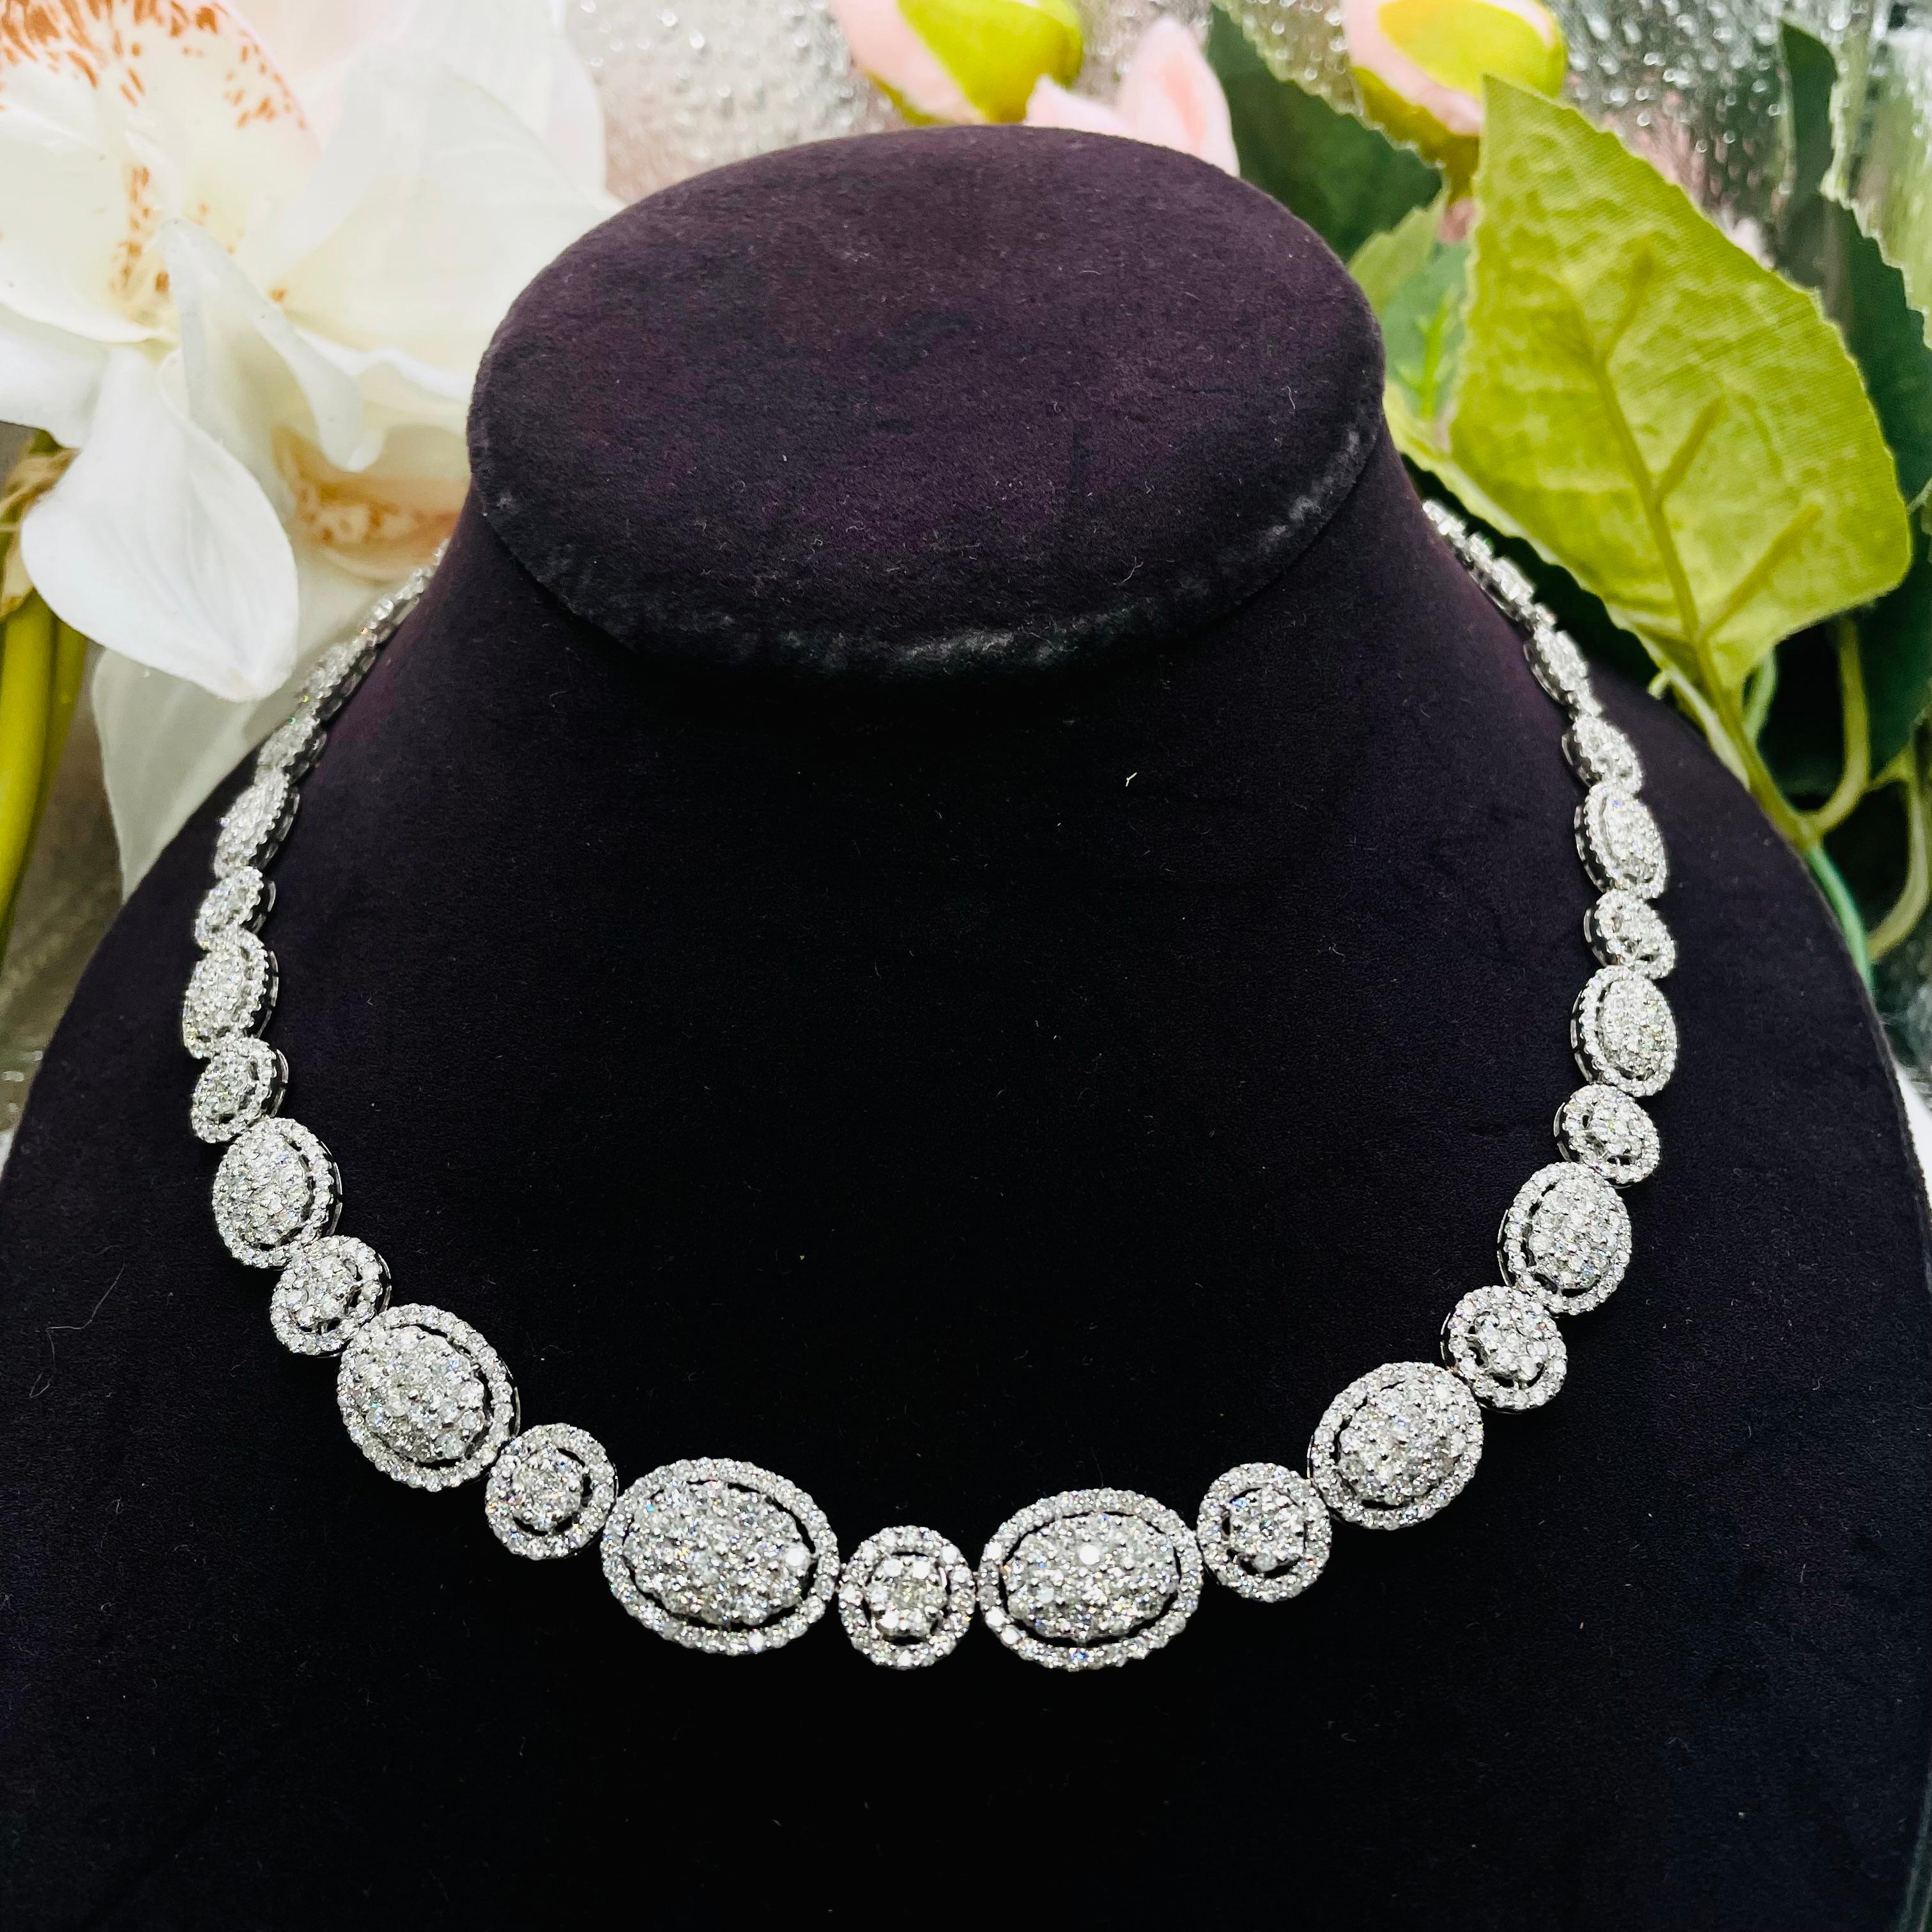 Crafted from 18k white gold,weighing 32.78 grams this necklace boasts a brilliant shine that perfectly complements the dazzling diamonds that adorn it. The total carat weight of the diamonds is an impressive 15.11 TCW, ensuring that this necklace